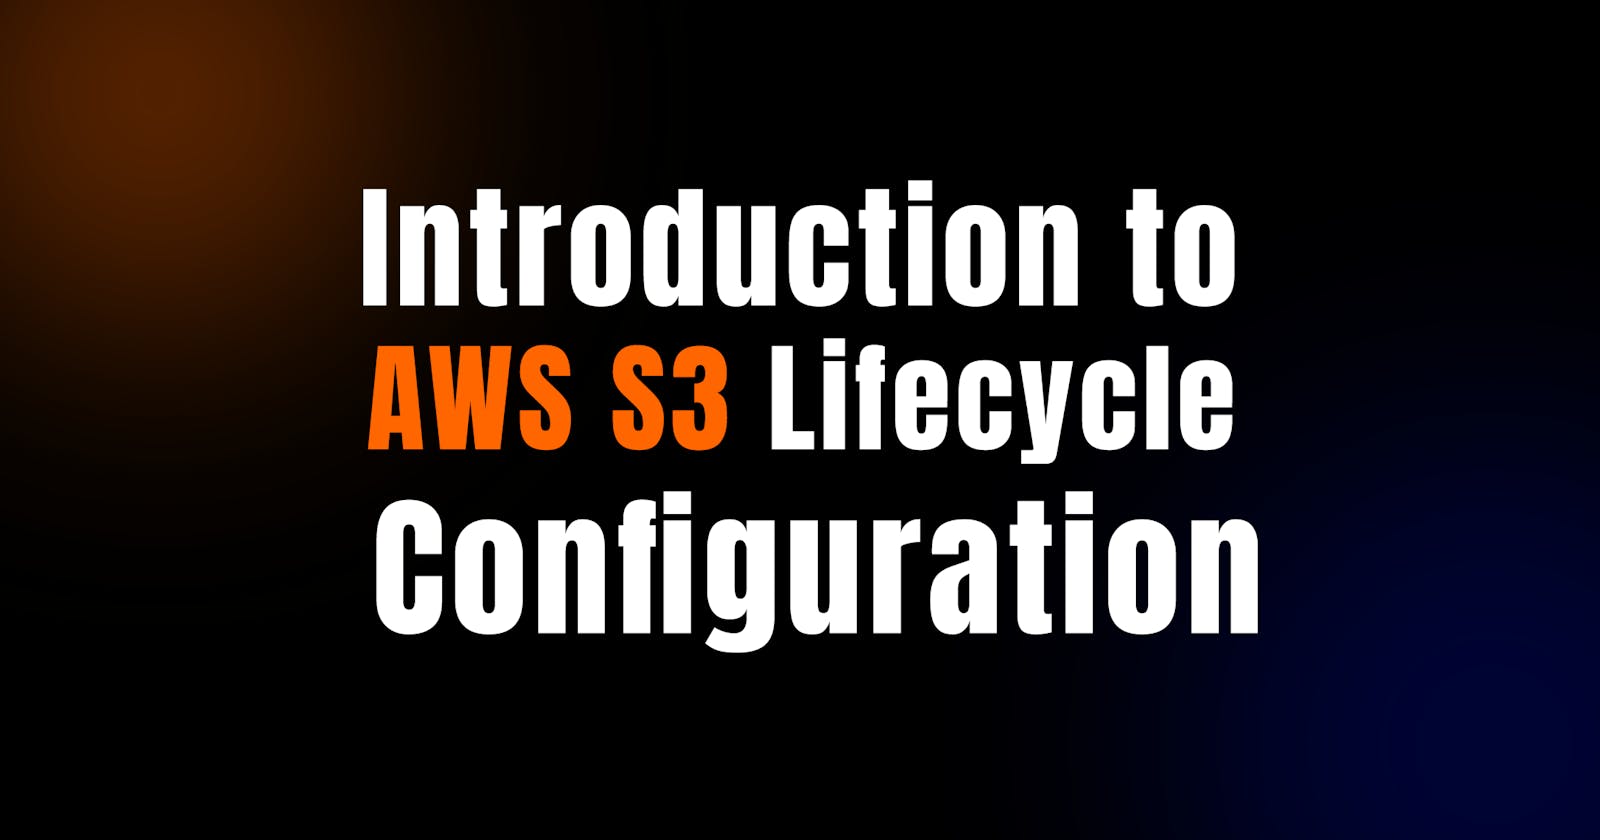 Introduction to AWS S3 lifecycle configuration